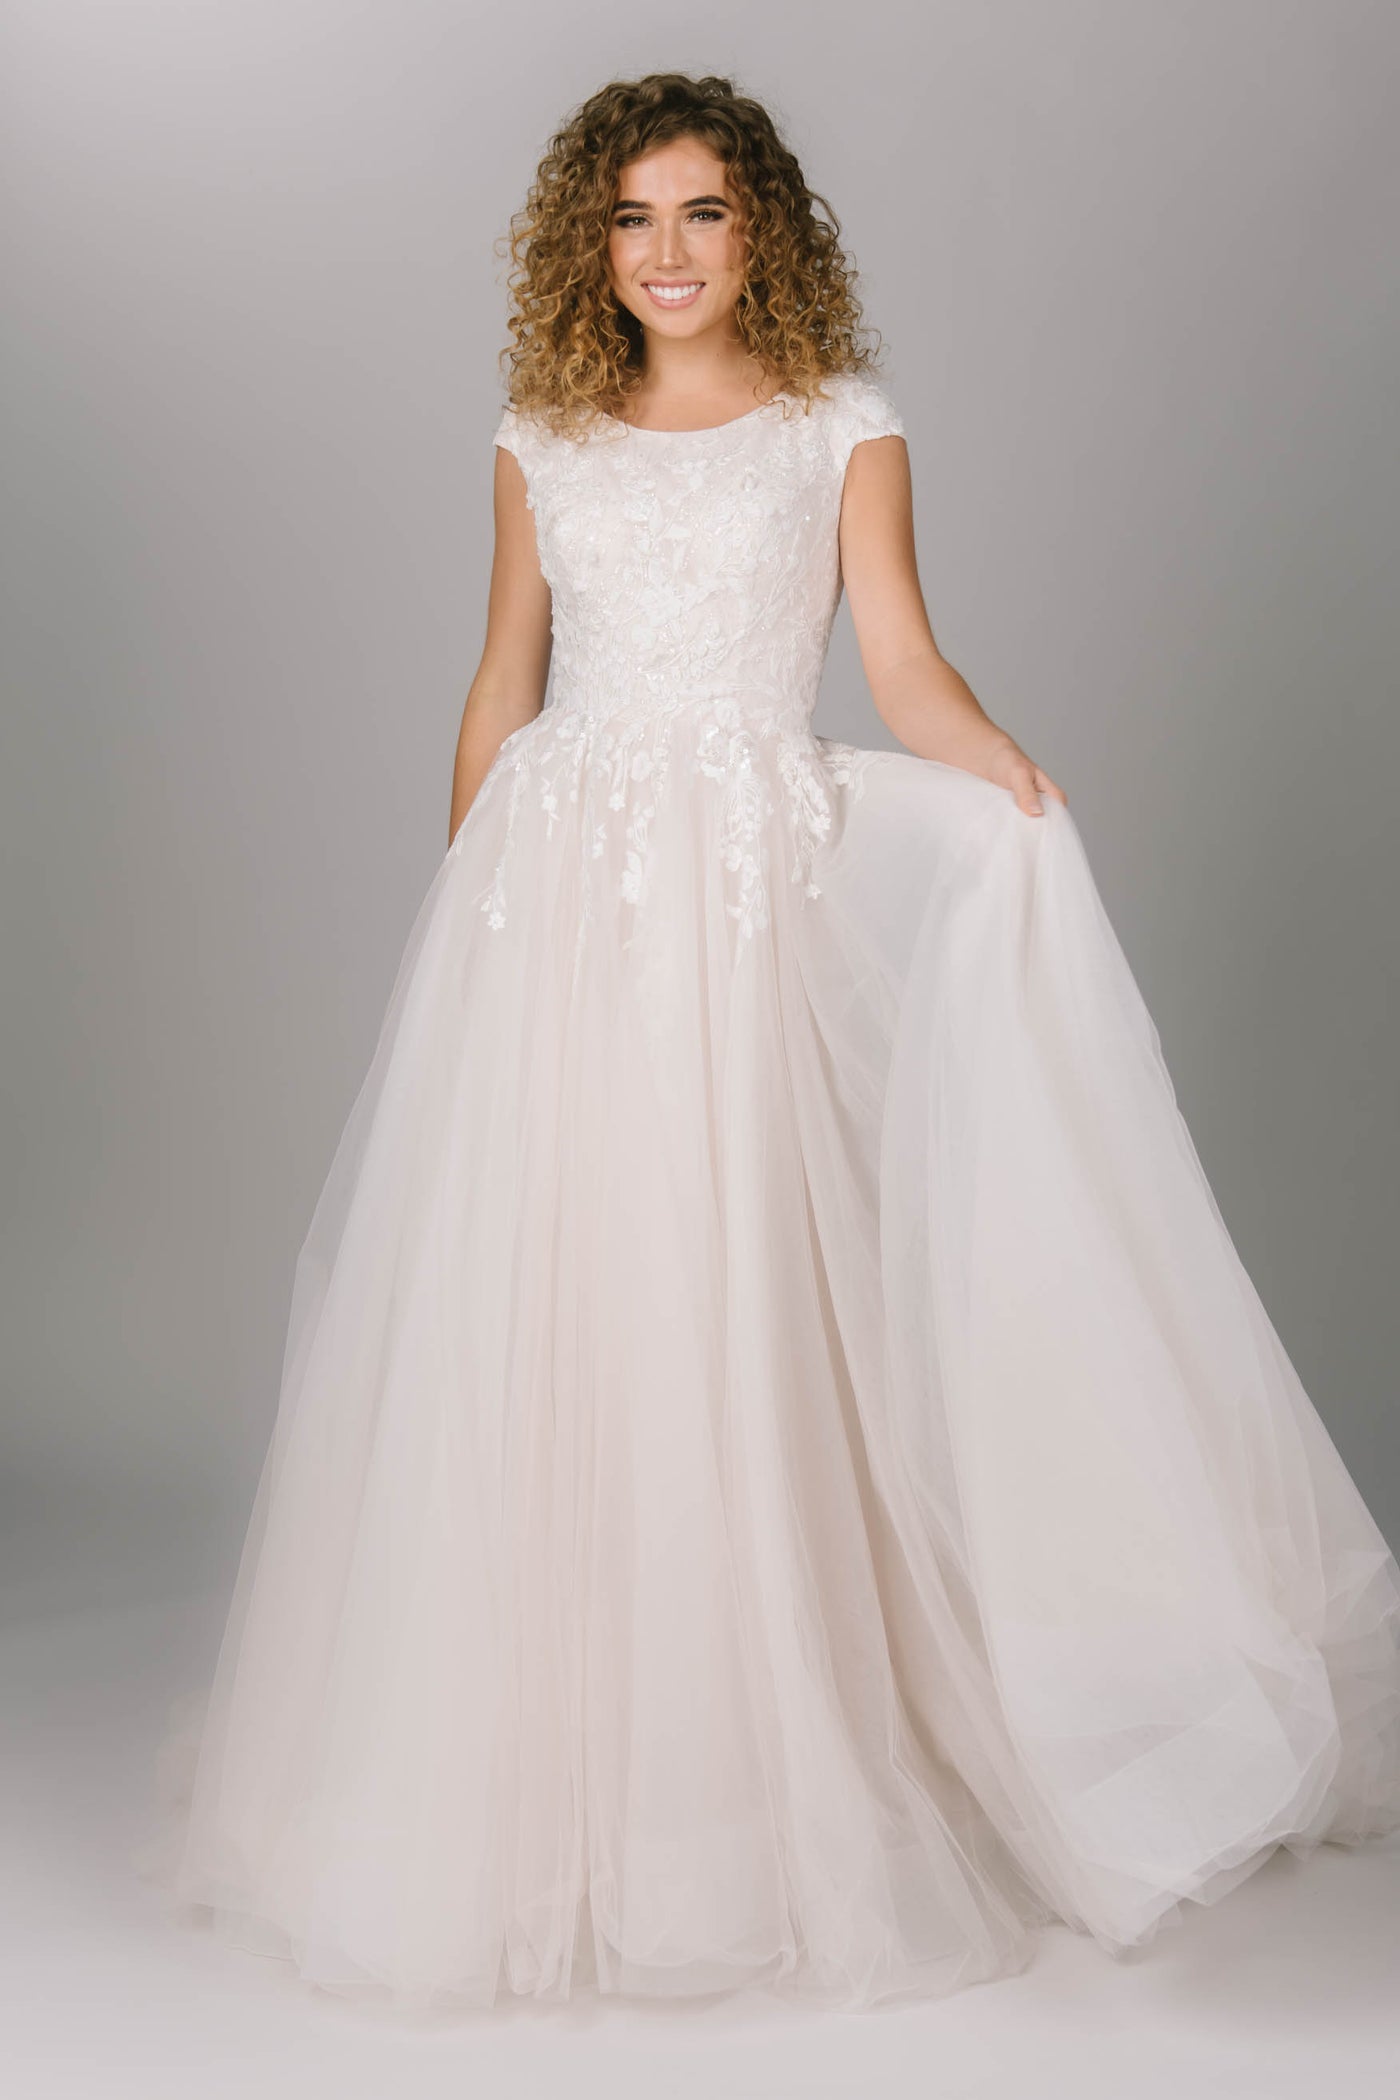 Front view of modest ballgown wedding dress. This dress has cap sleeves and a tulle bottom. It has delicate lace trickling down the waistline of the dress. It has a zipper with buttons all down the train. Magical modest ballgown wedding dress. 